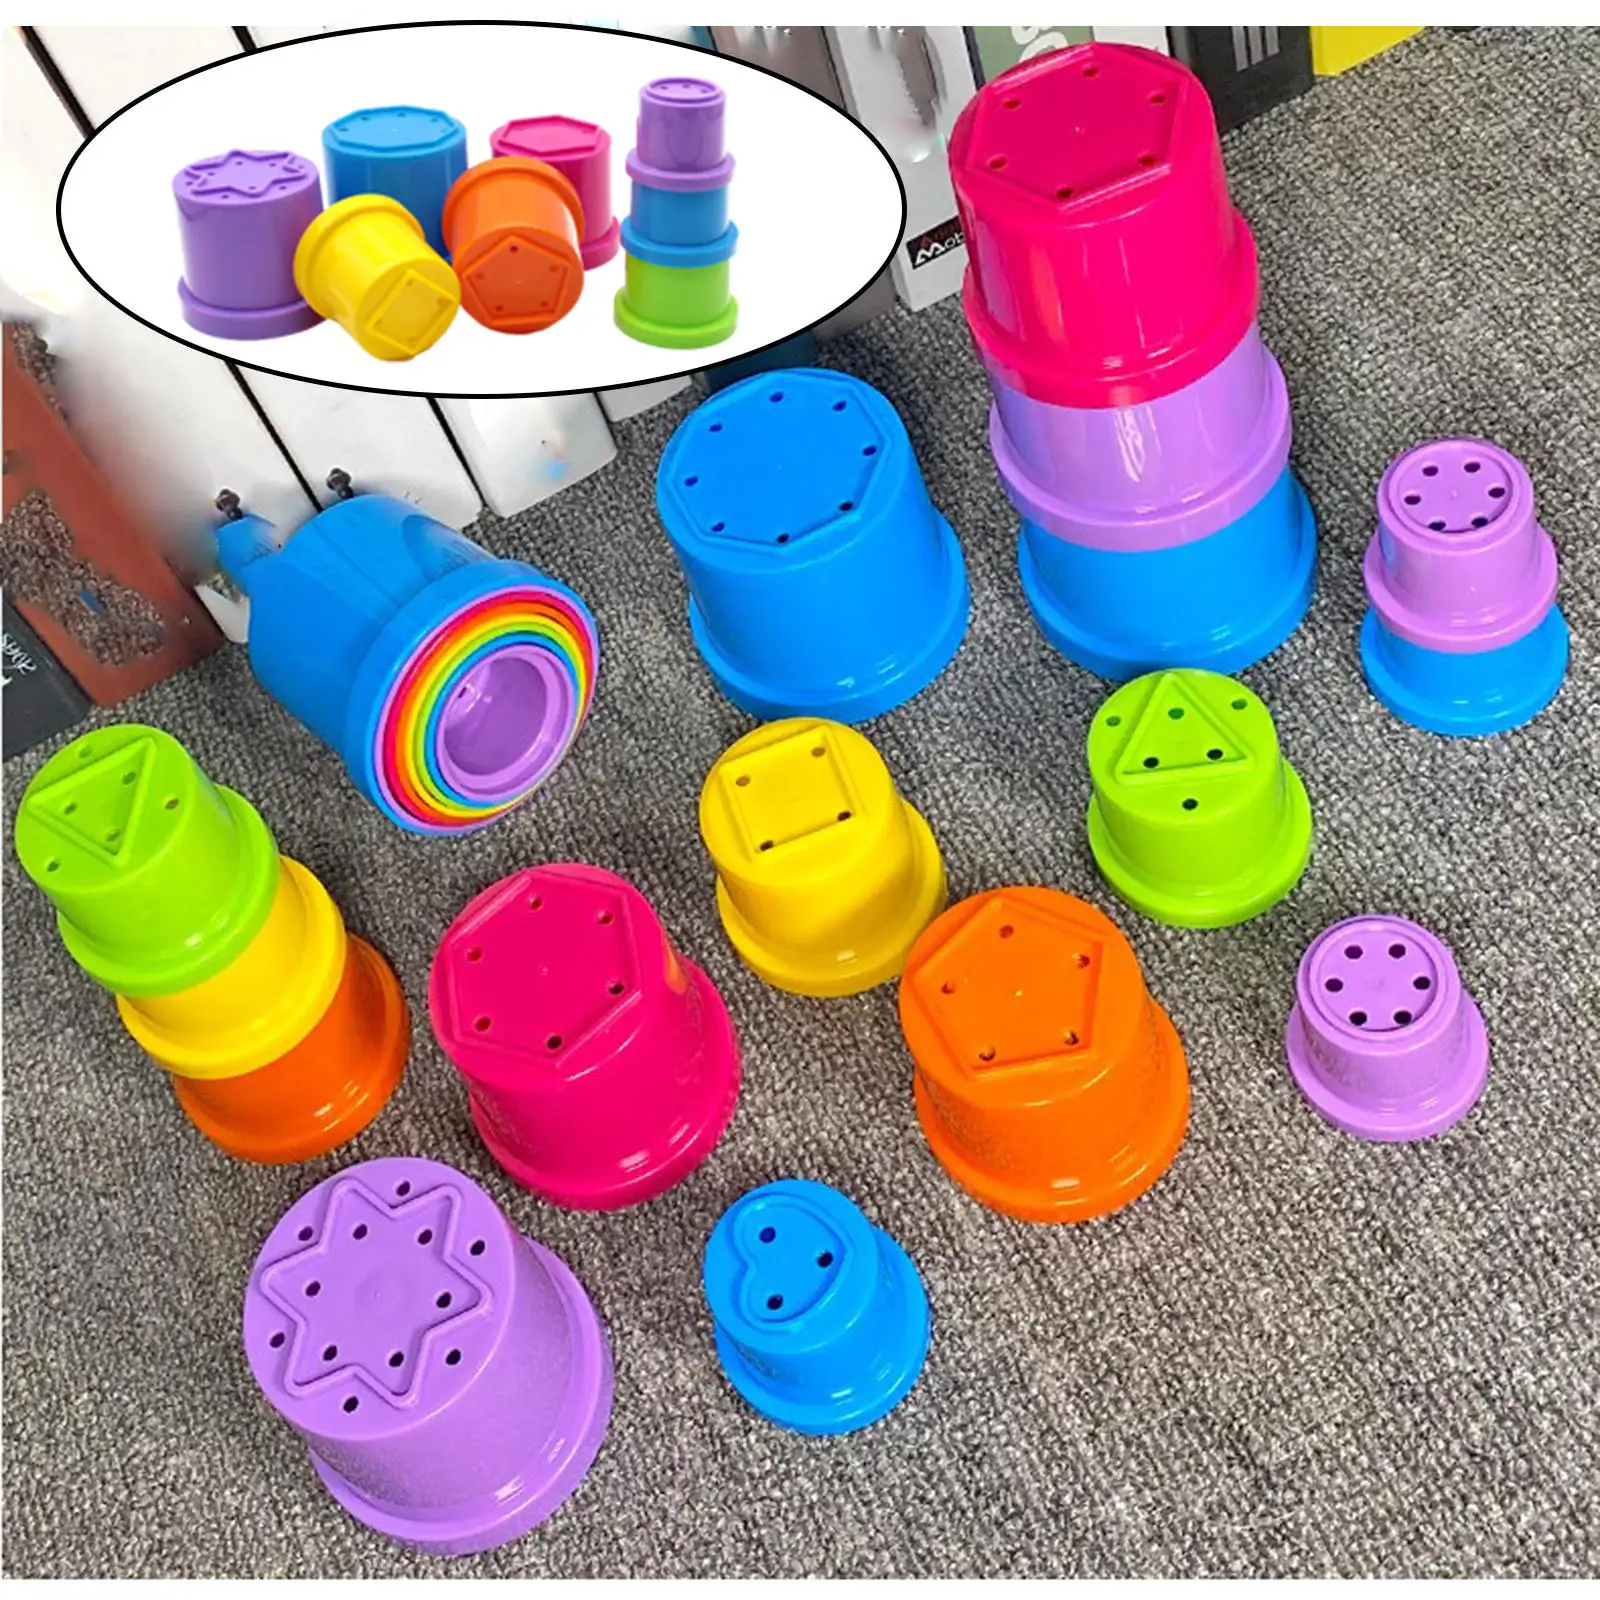 Rainbow Bath Stacking Cup Toy Preschool for Bath Gifts 10 Months +